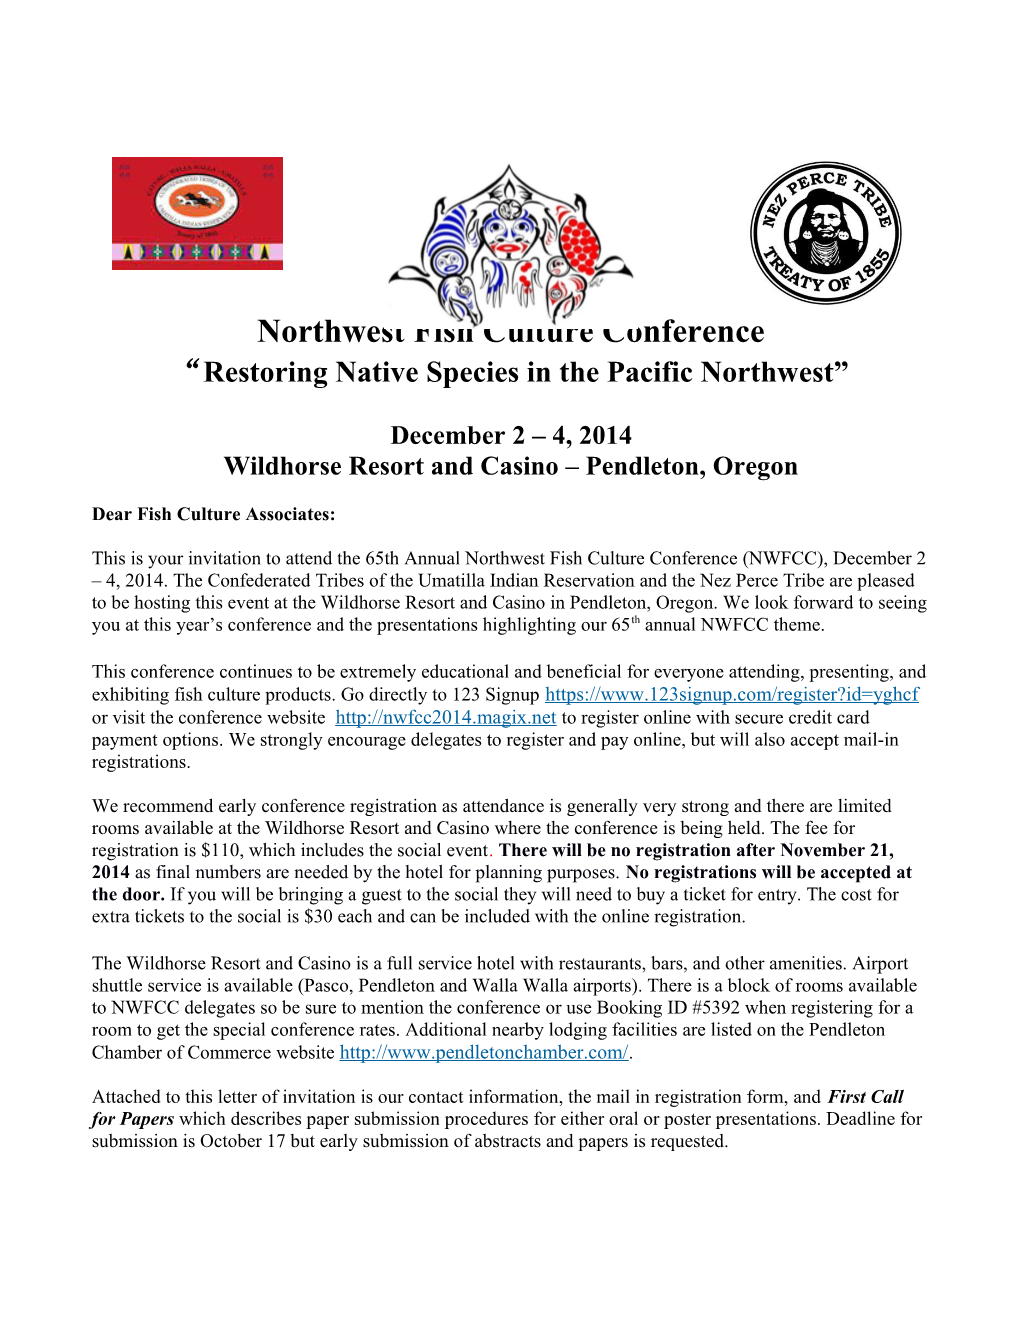 Northwest Fish Culture Conference